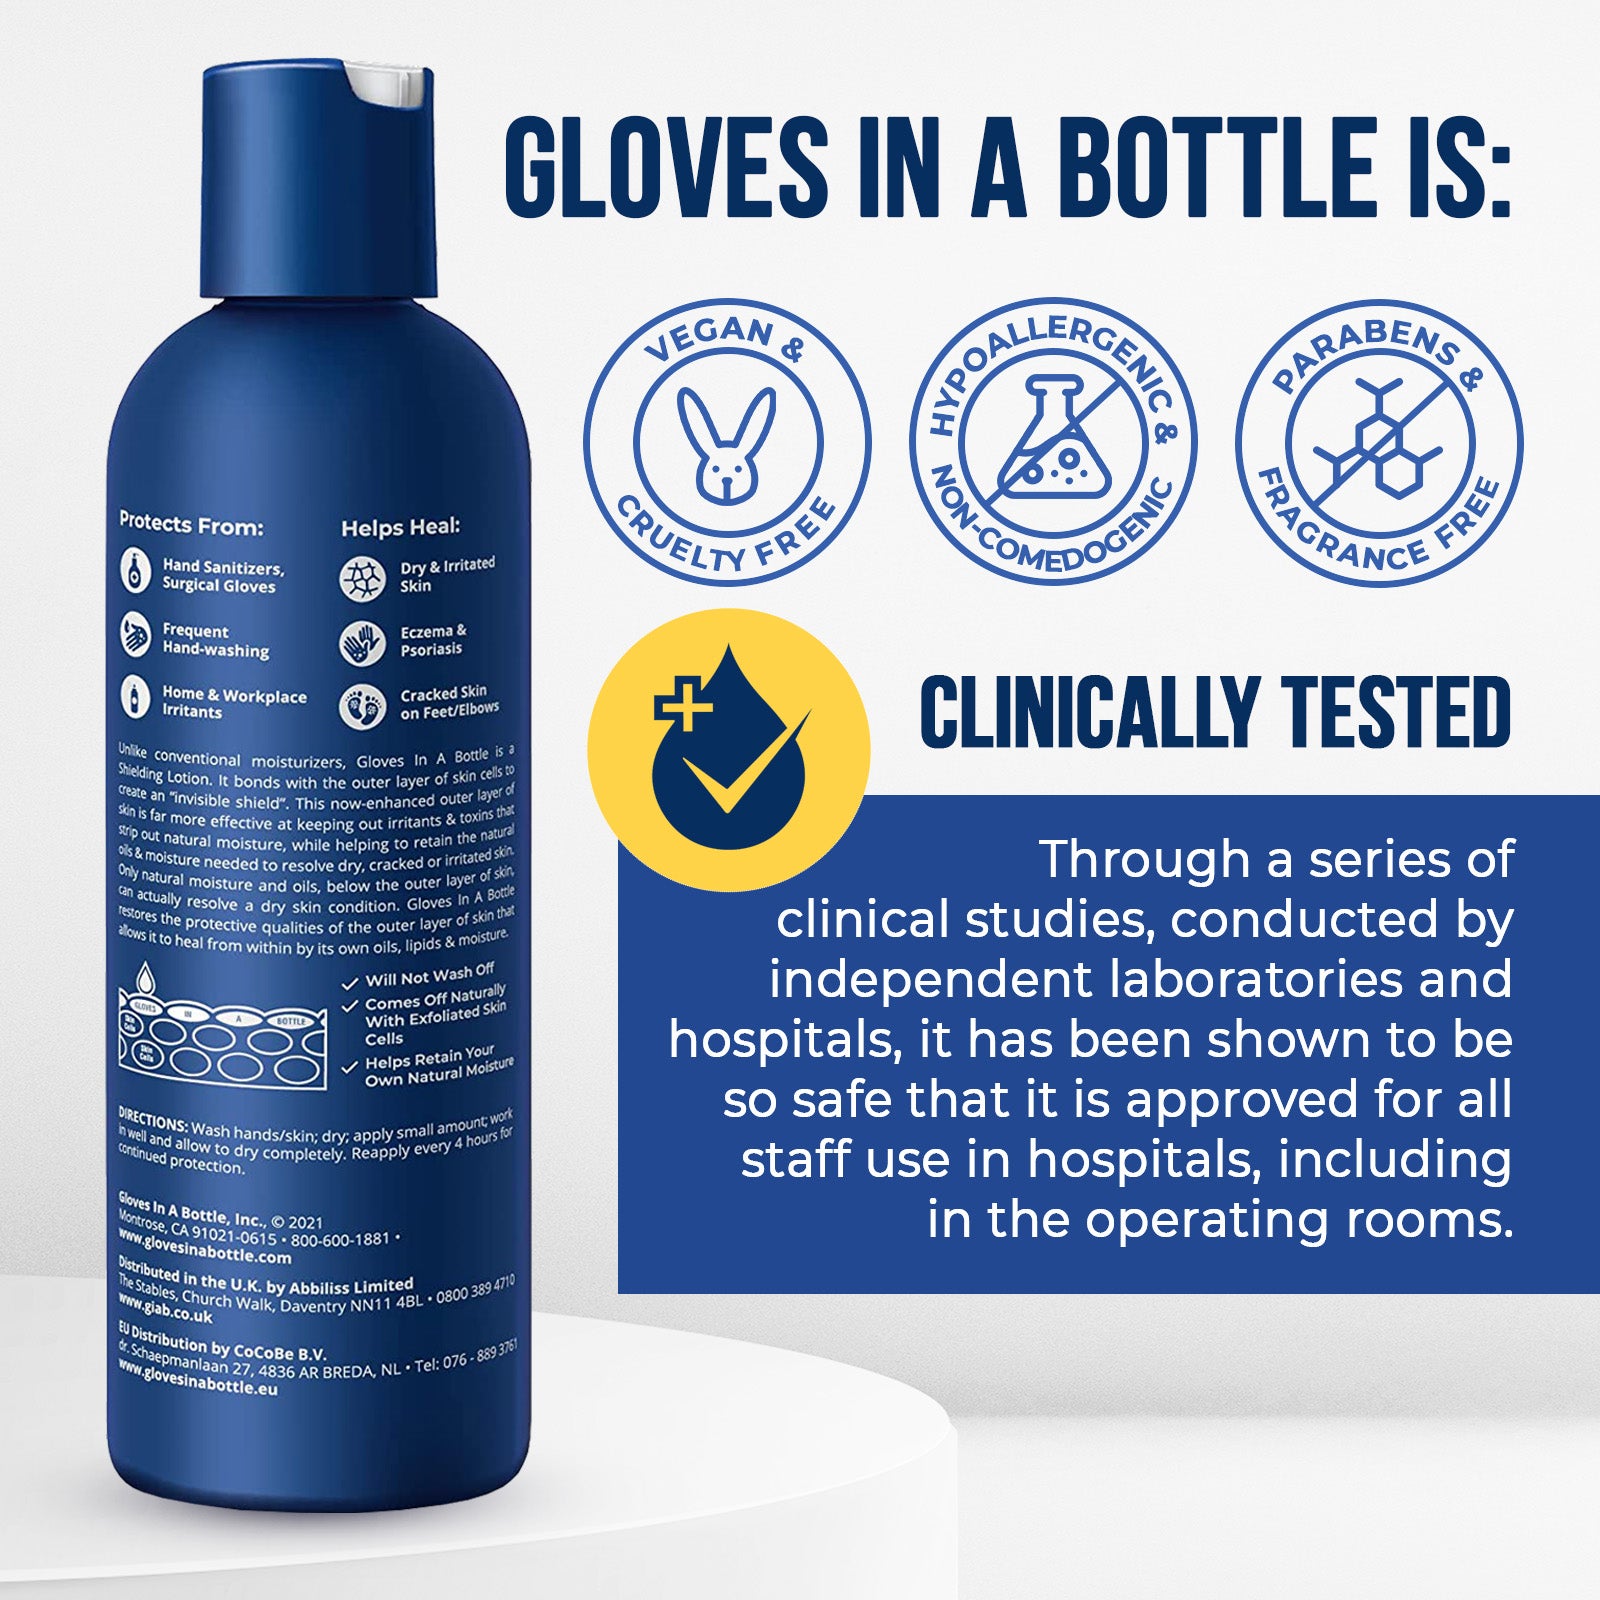 Gloves In A Bottle Hand Shielding Lotion 8oz Bottle with Pump